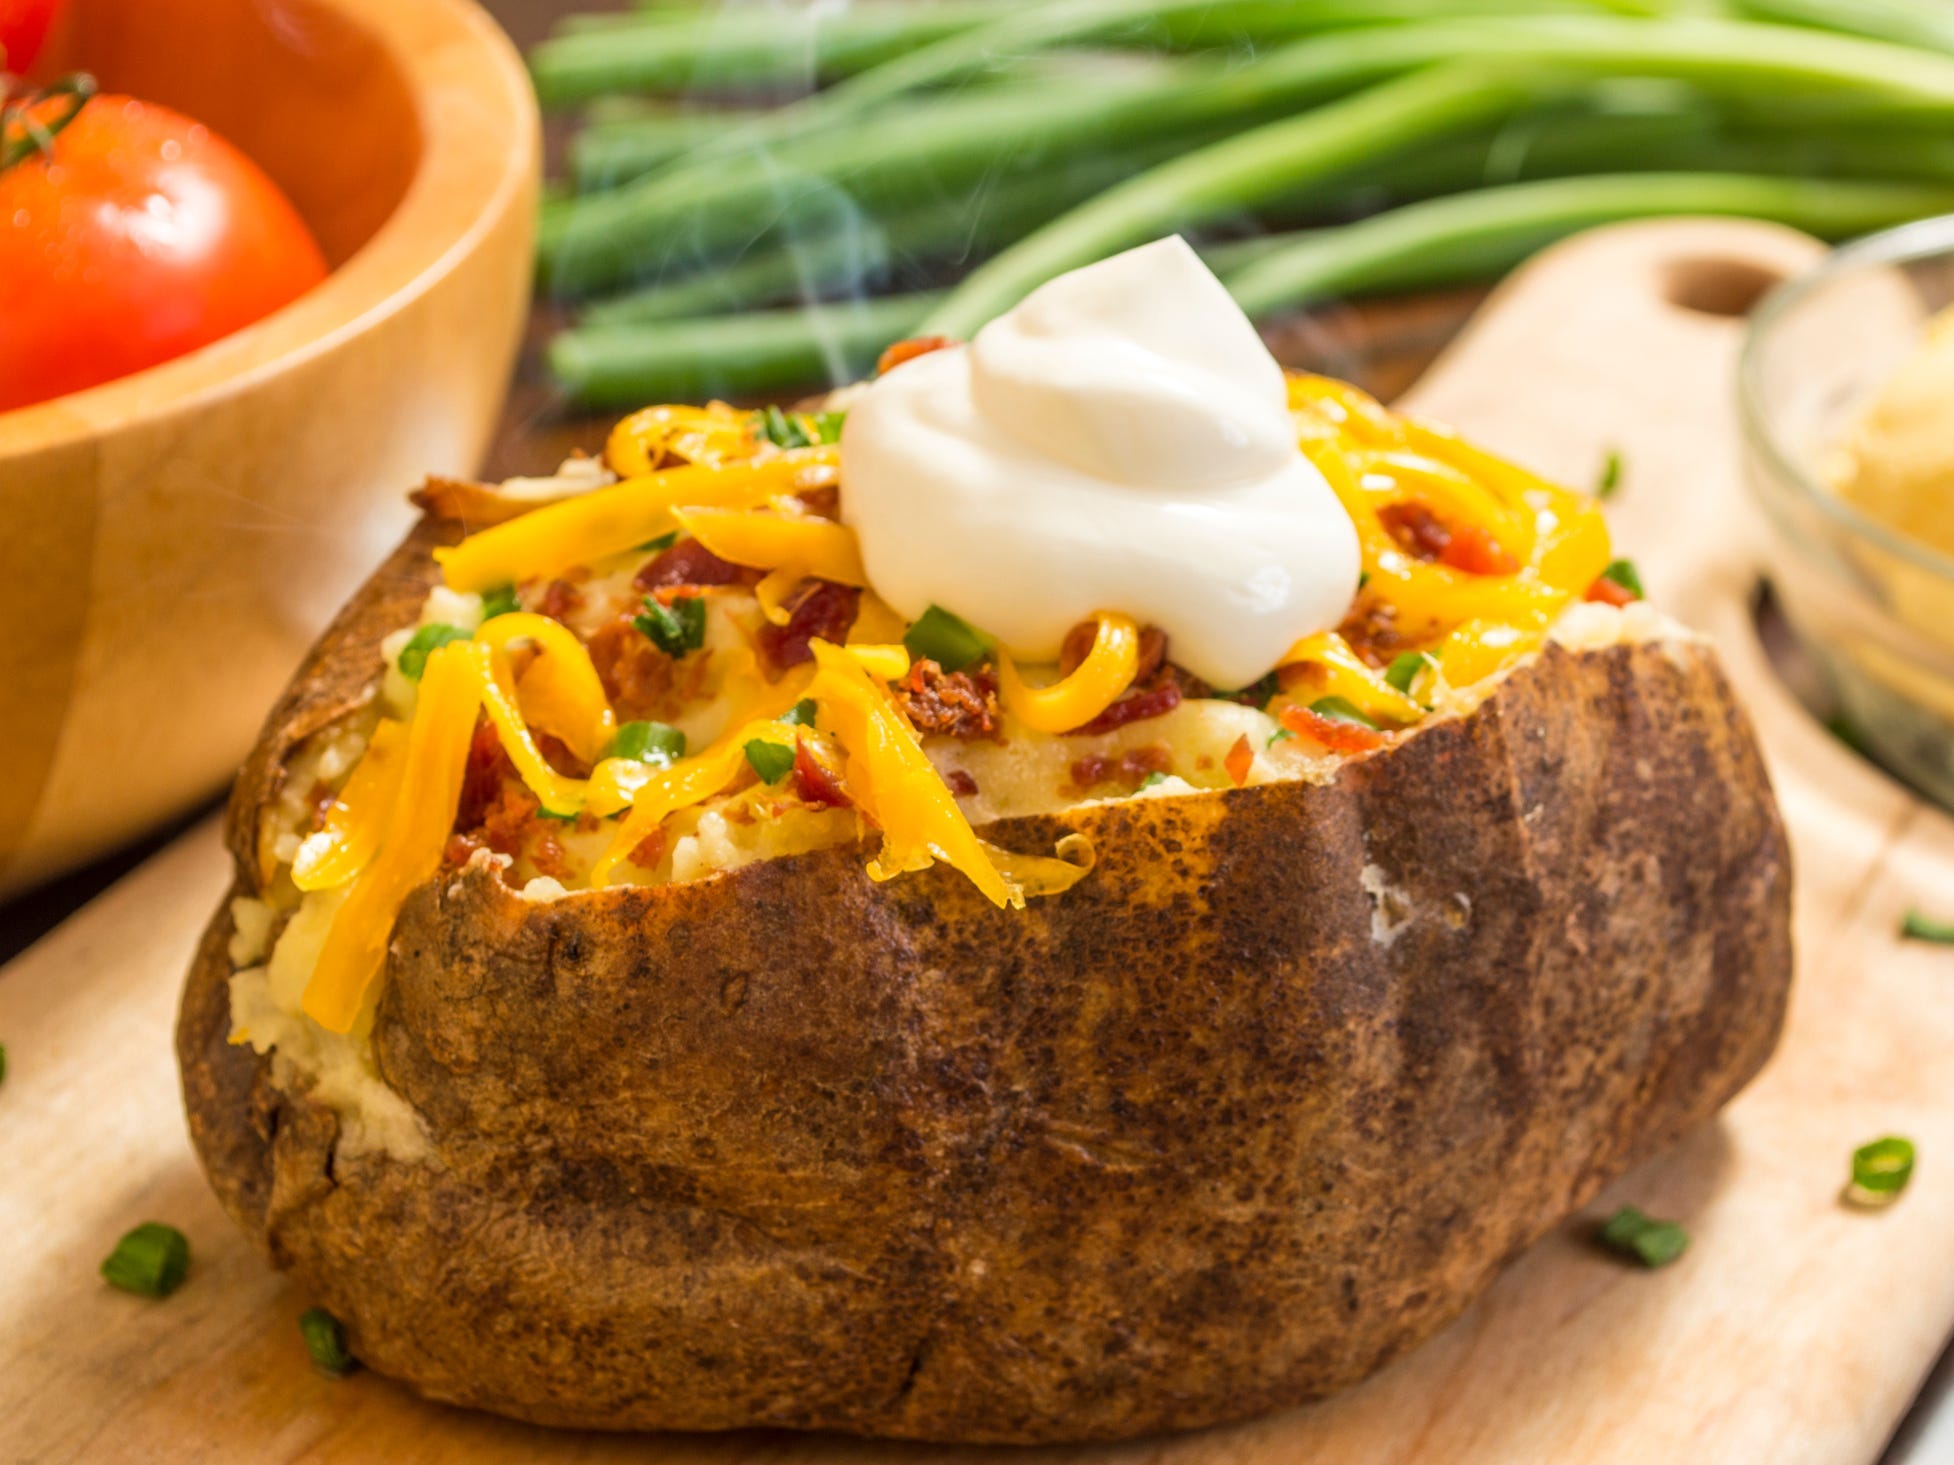 A baked potato split open and topped with cheese, bacon, and sour cream